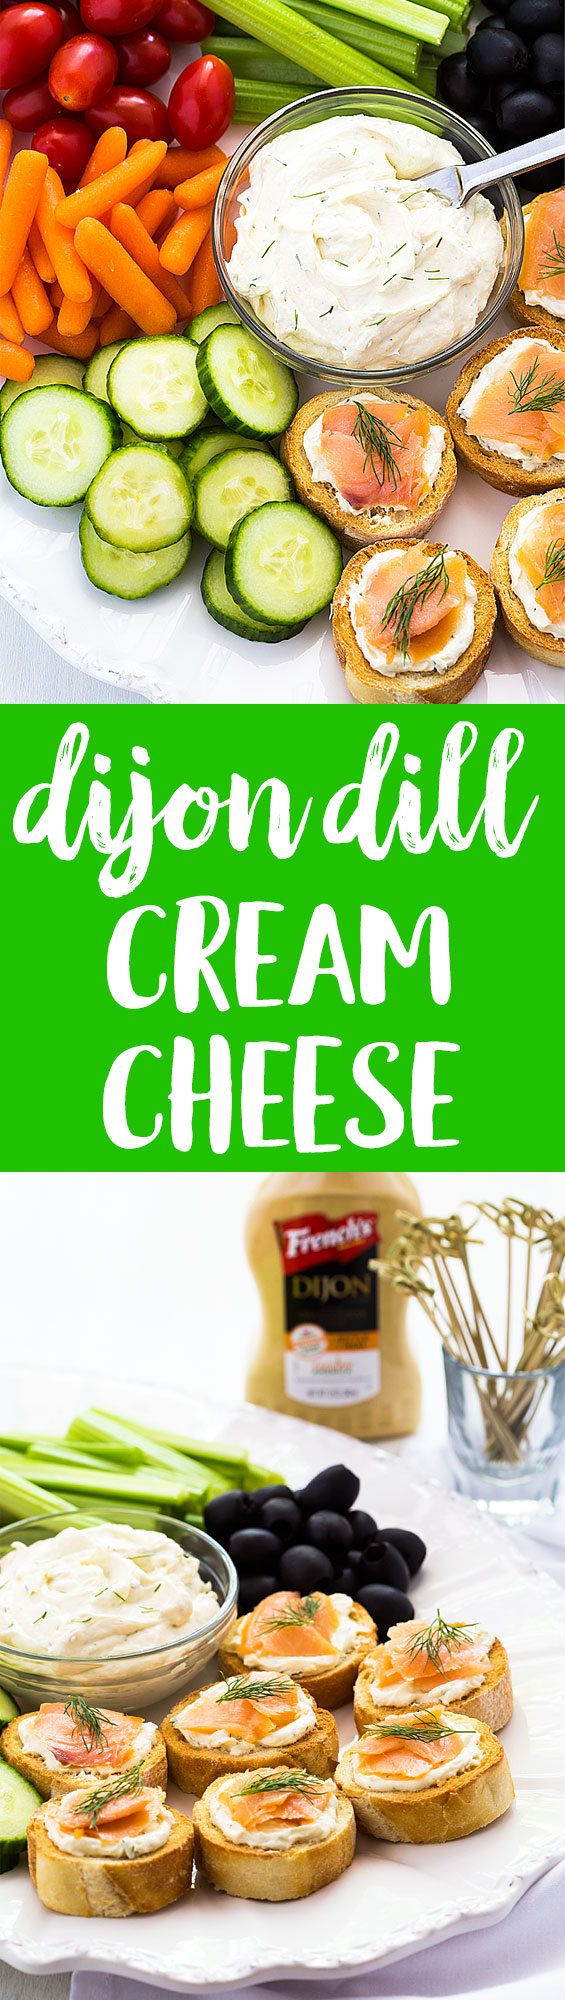 A two image vertical collage of dijon dill cream cheese with overlay text in the center.